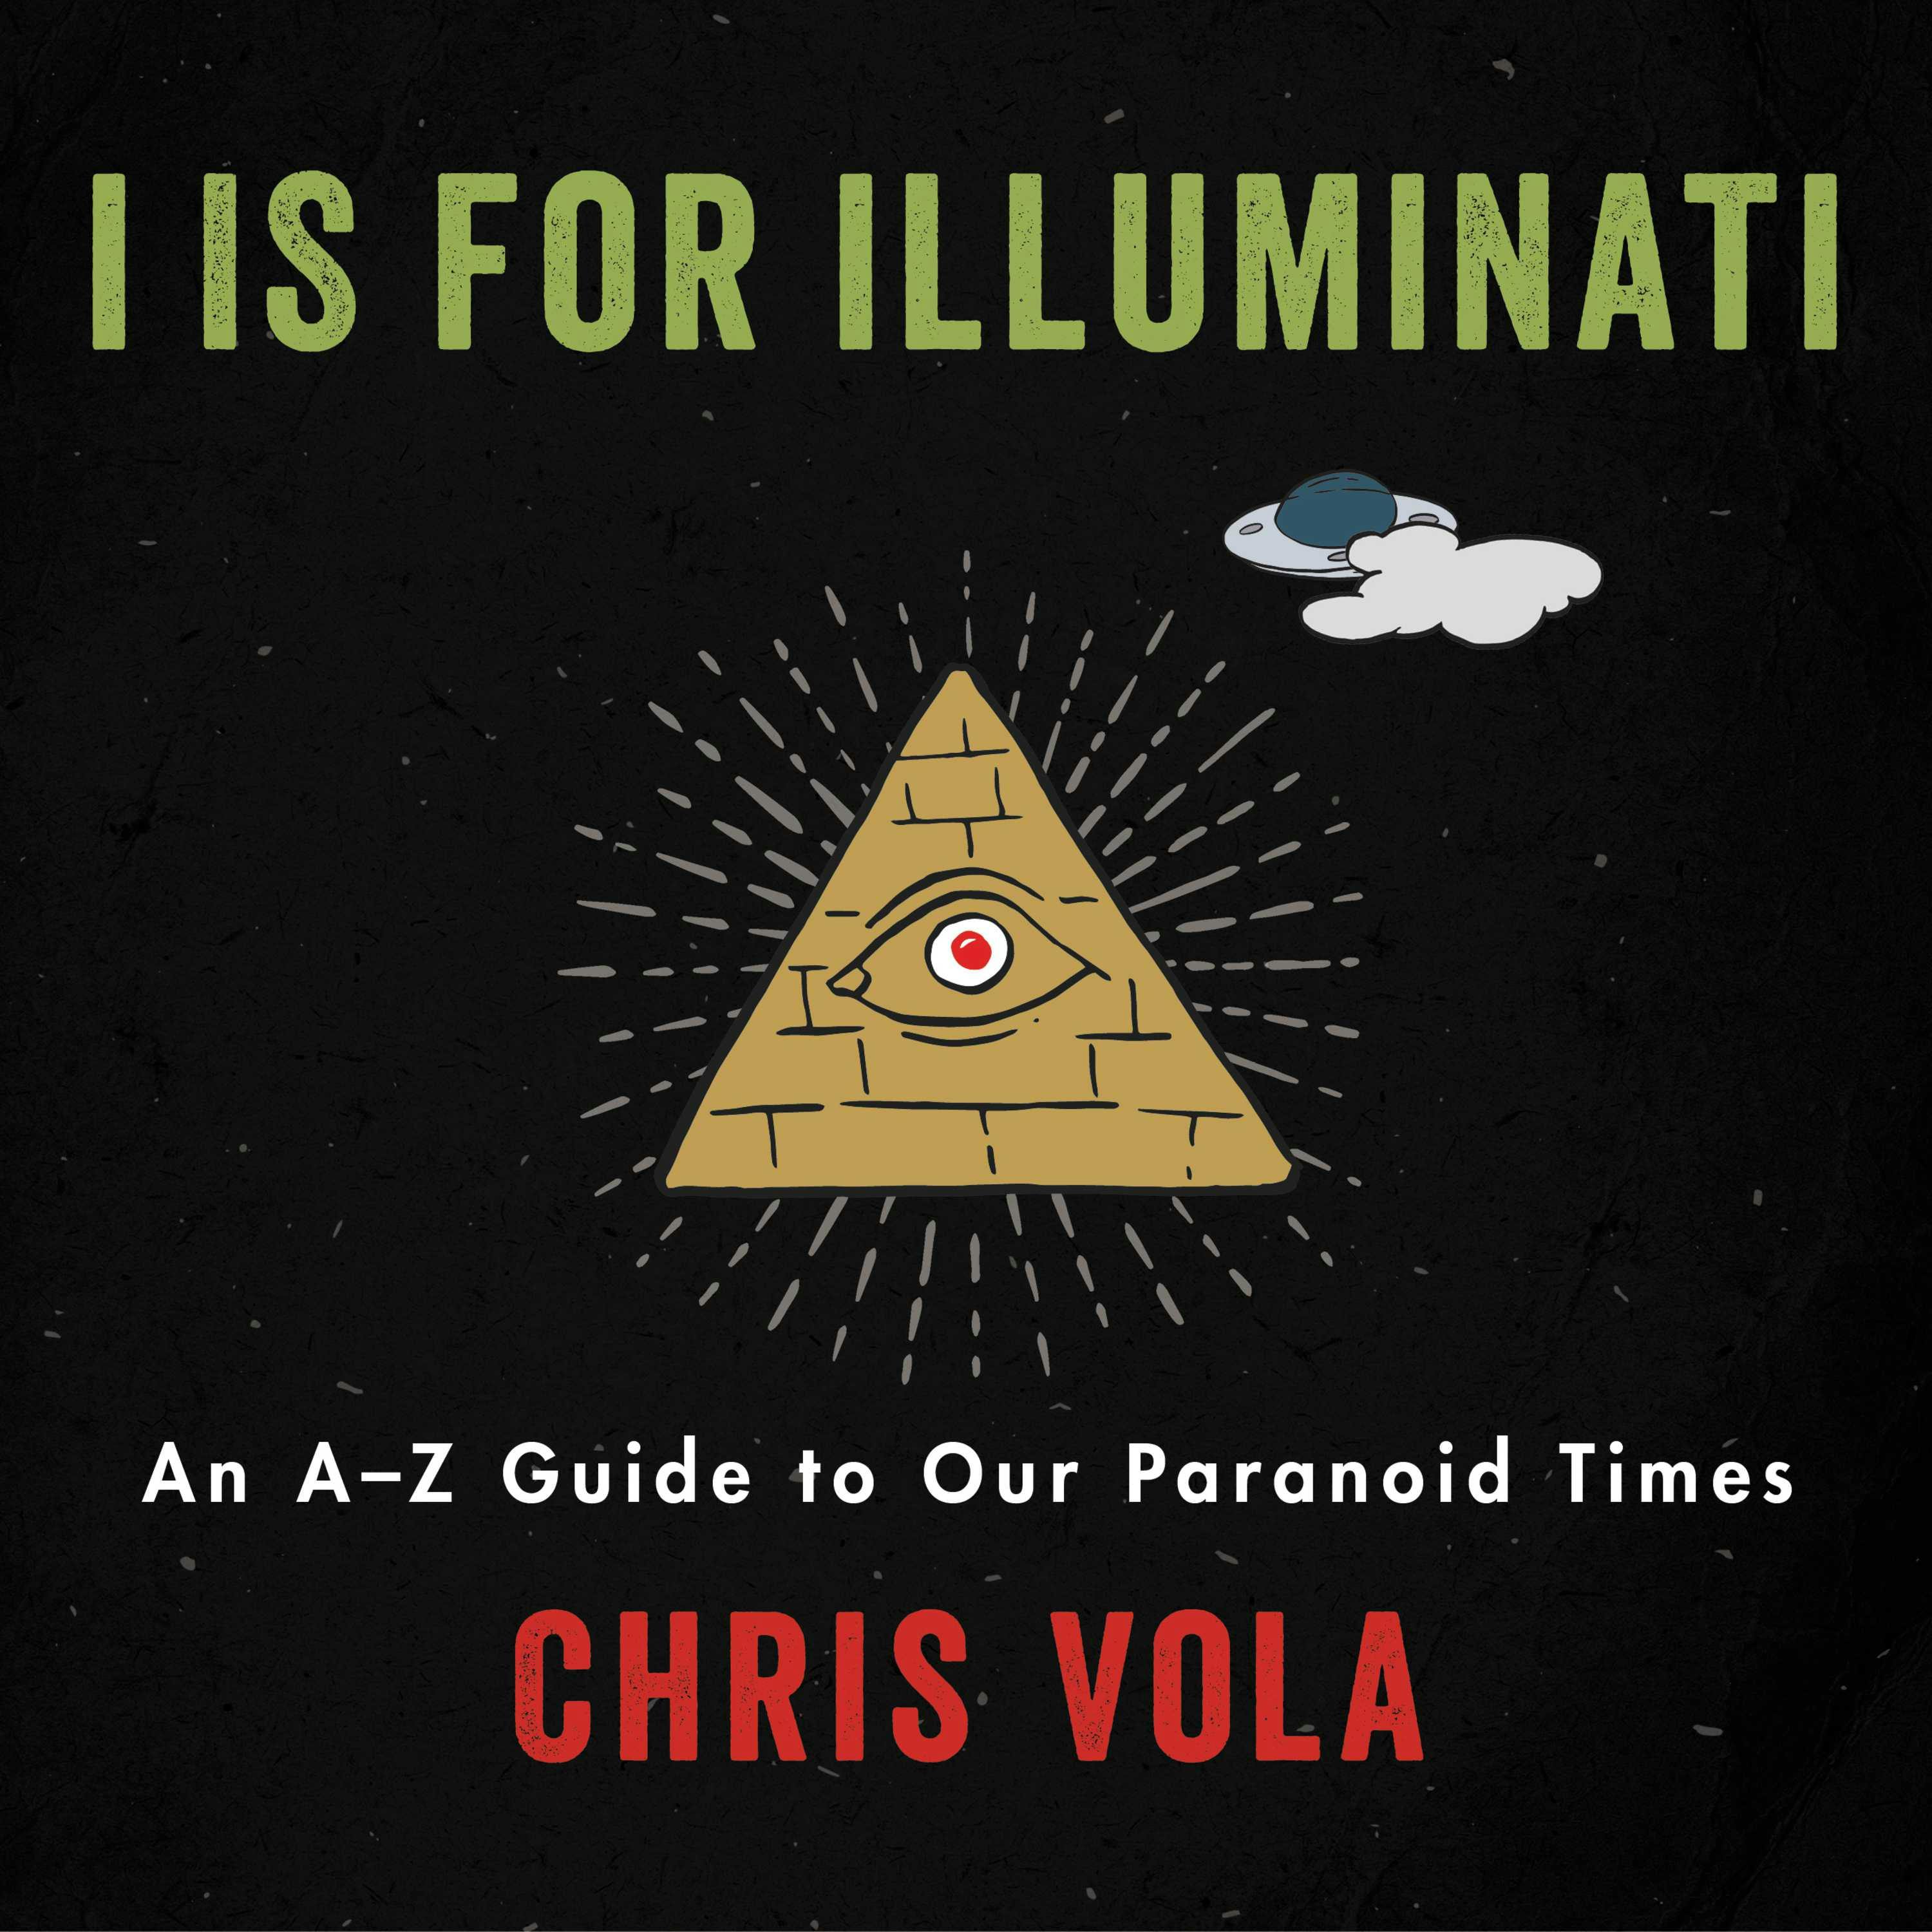 I is for Illuminati: An A-Z Guide to Our Paranoid Times - Chris Vola